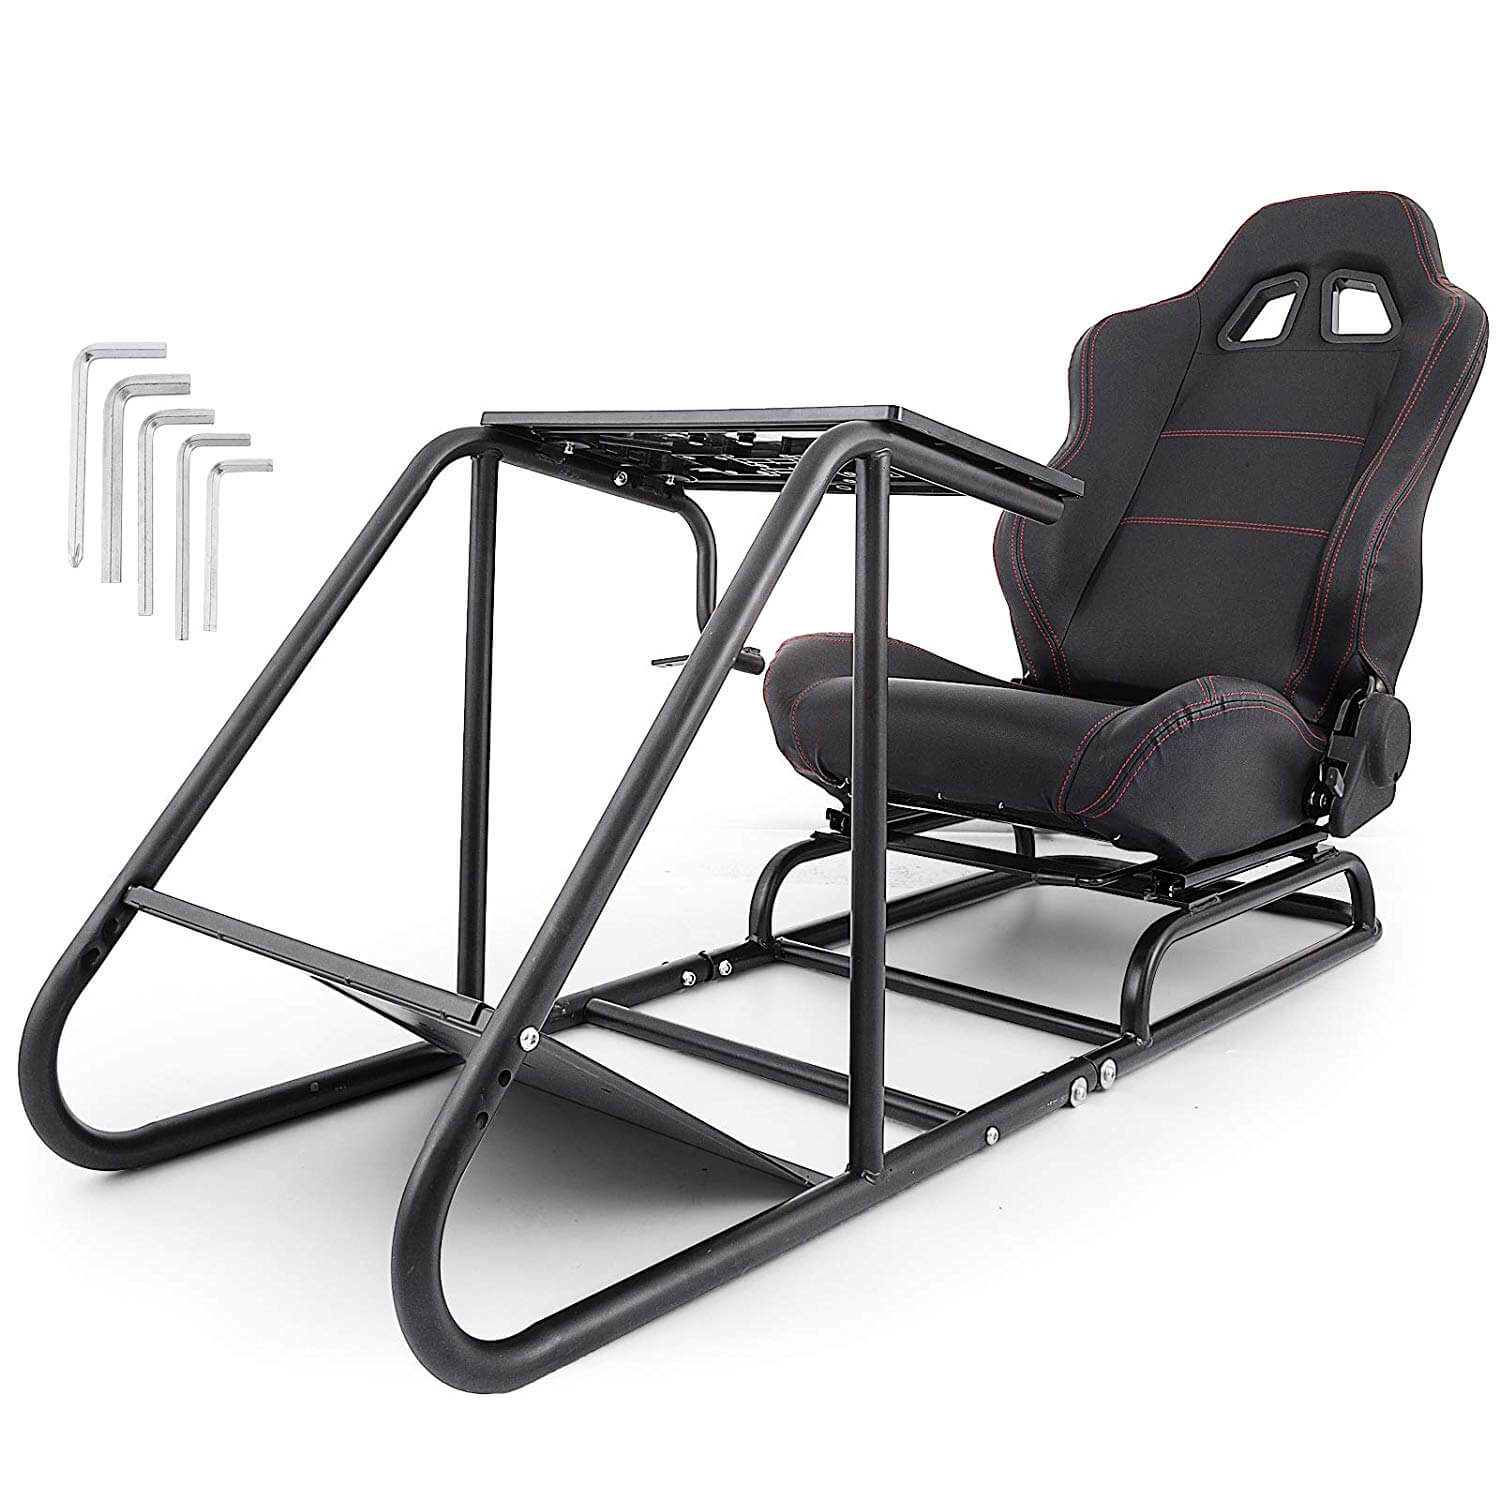 Best Racing Gaming Chairs in 2018 Review & Buyers Guide